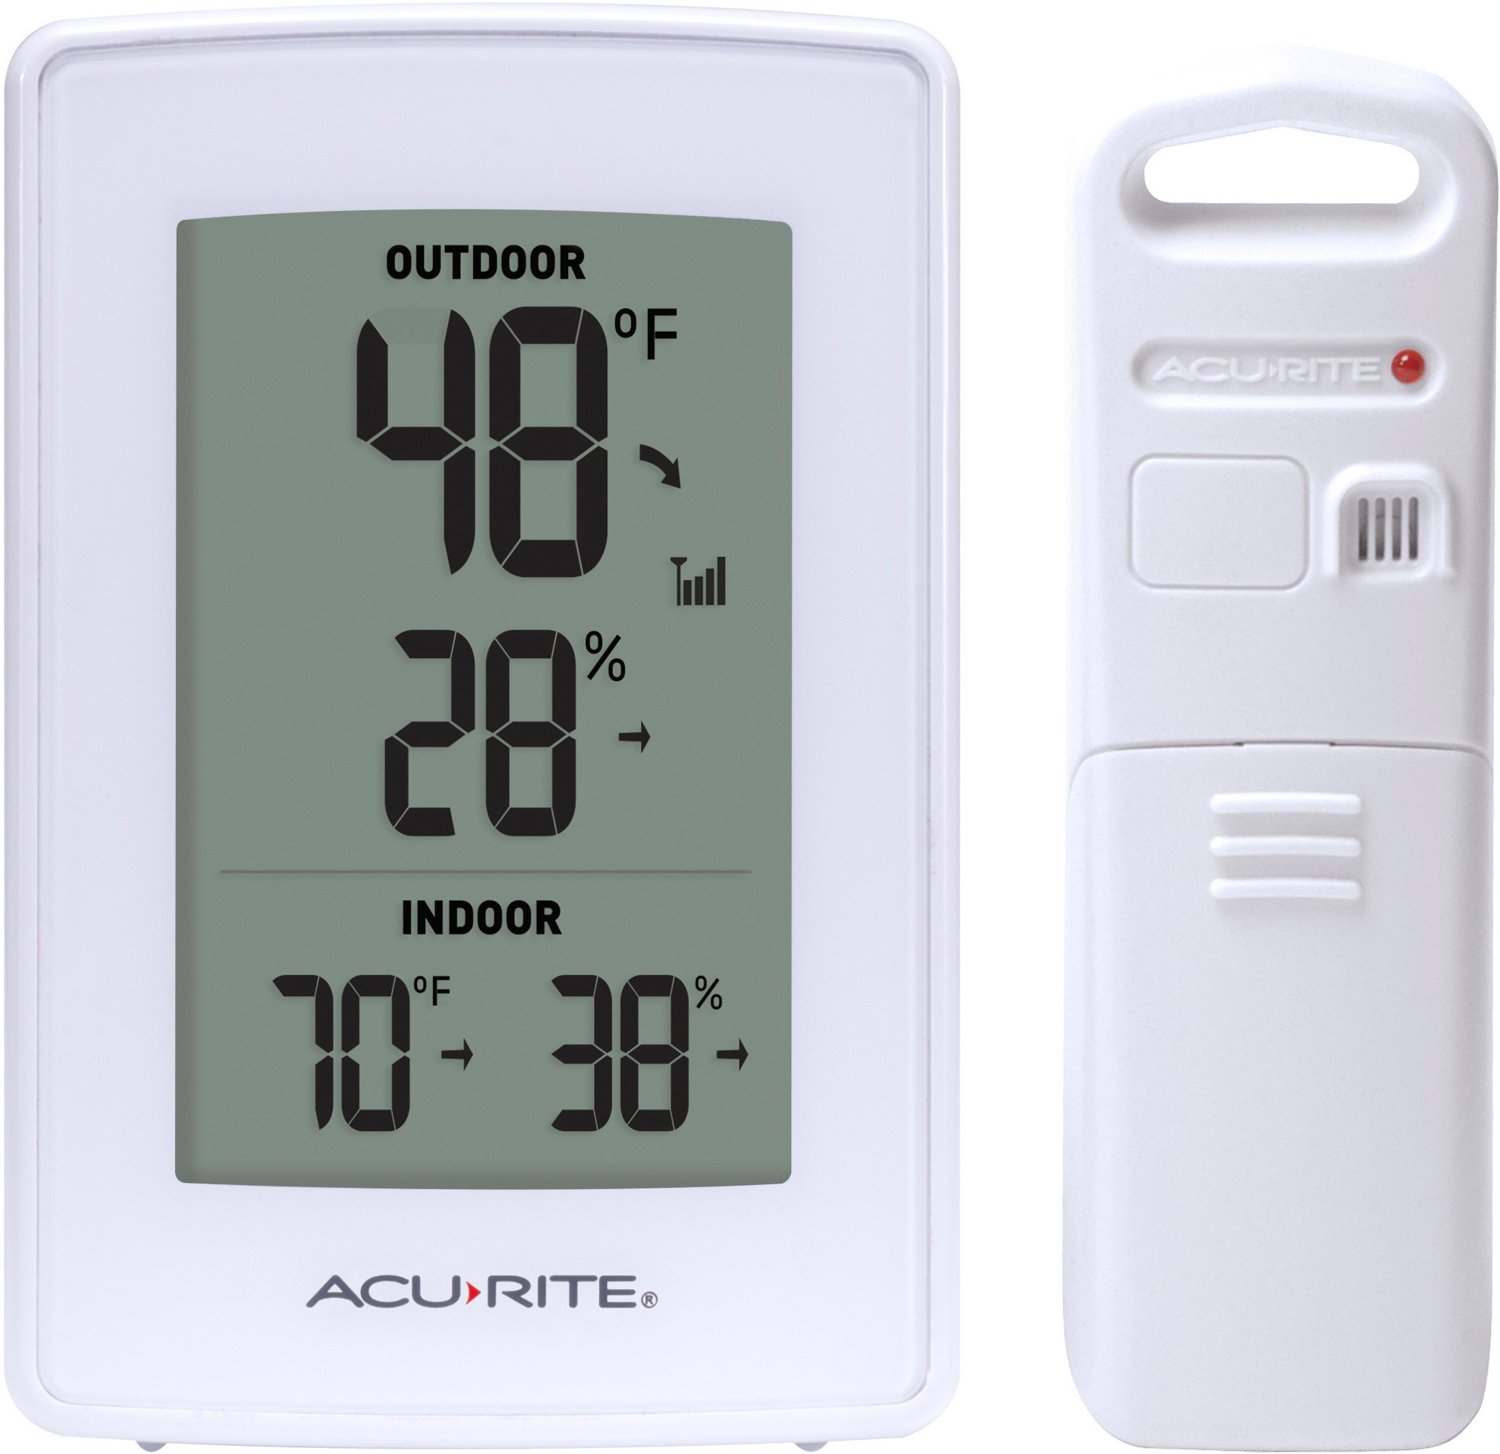 Antonki Room Thermometer For Home, 2 Pack Digital Temperature And